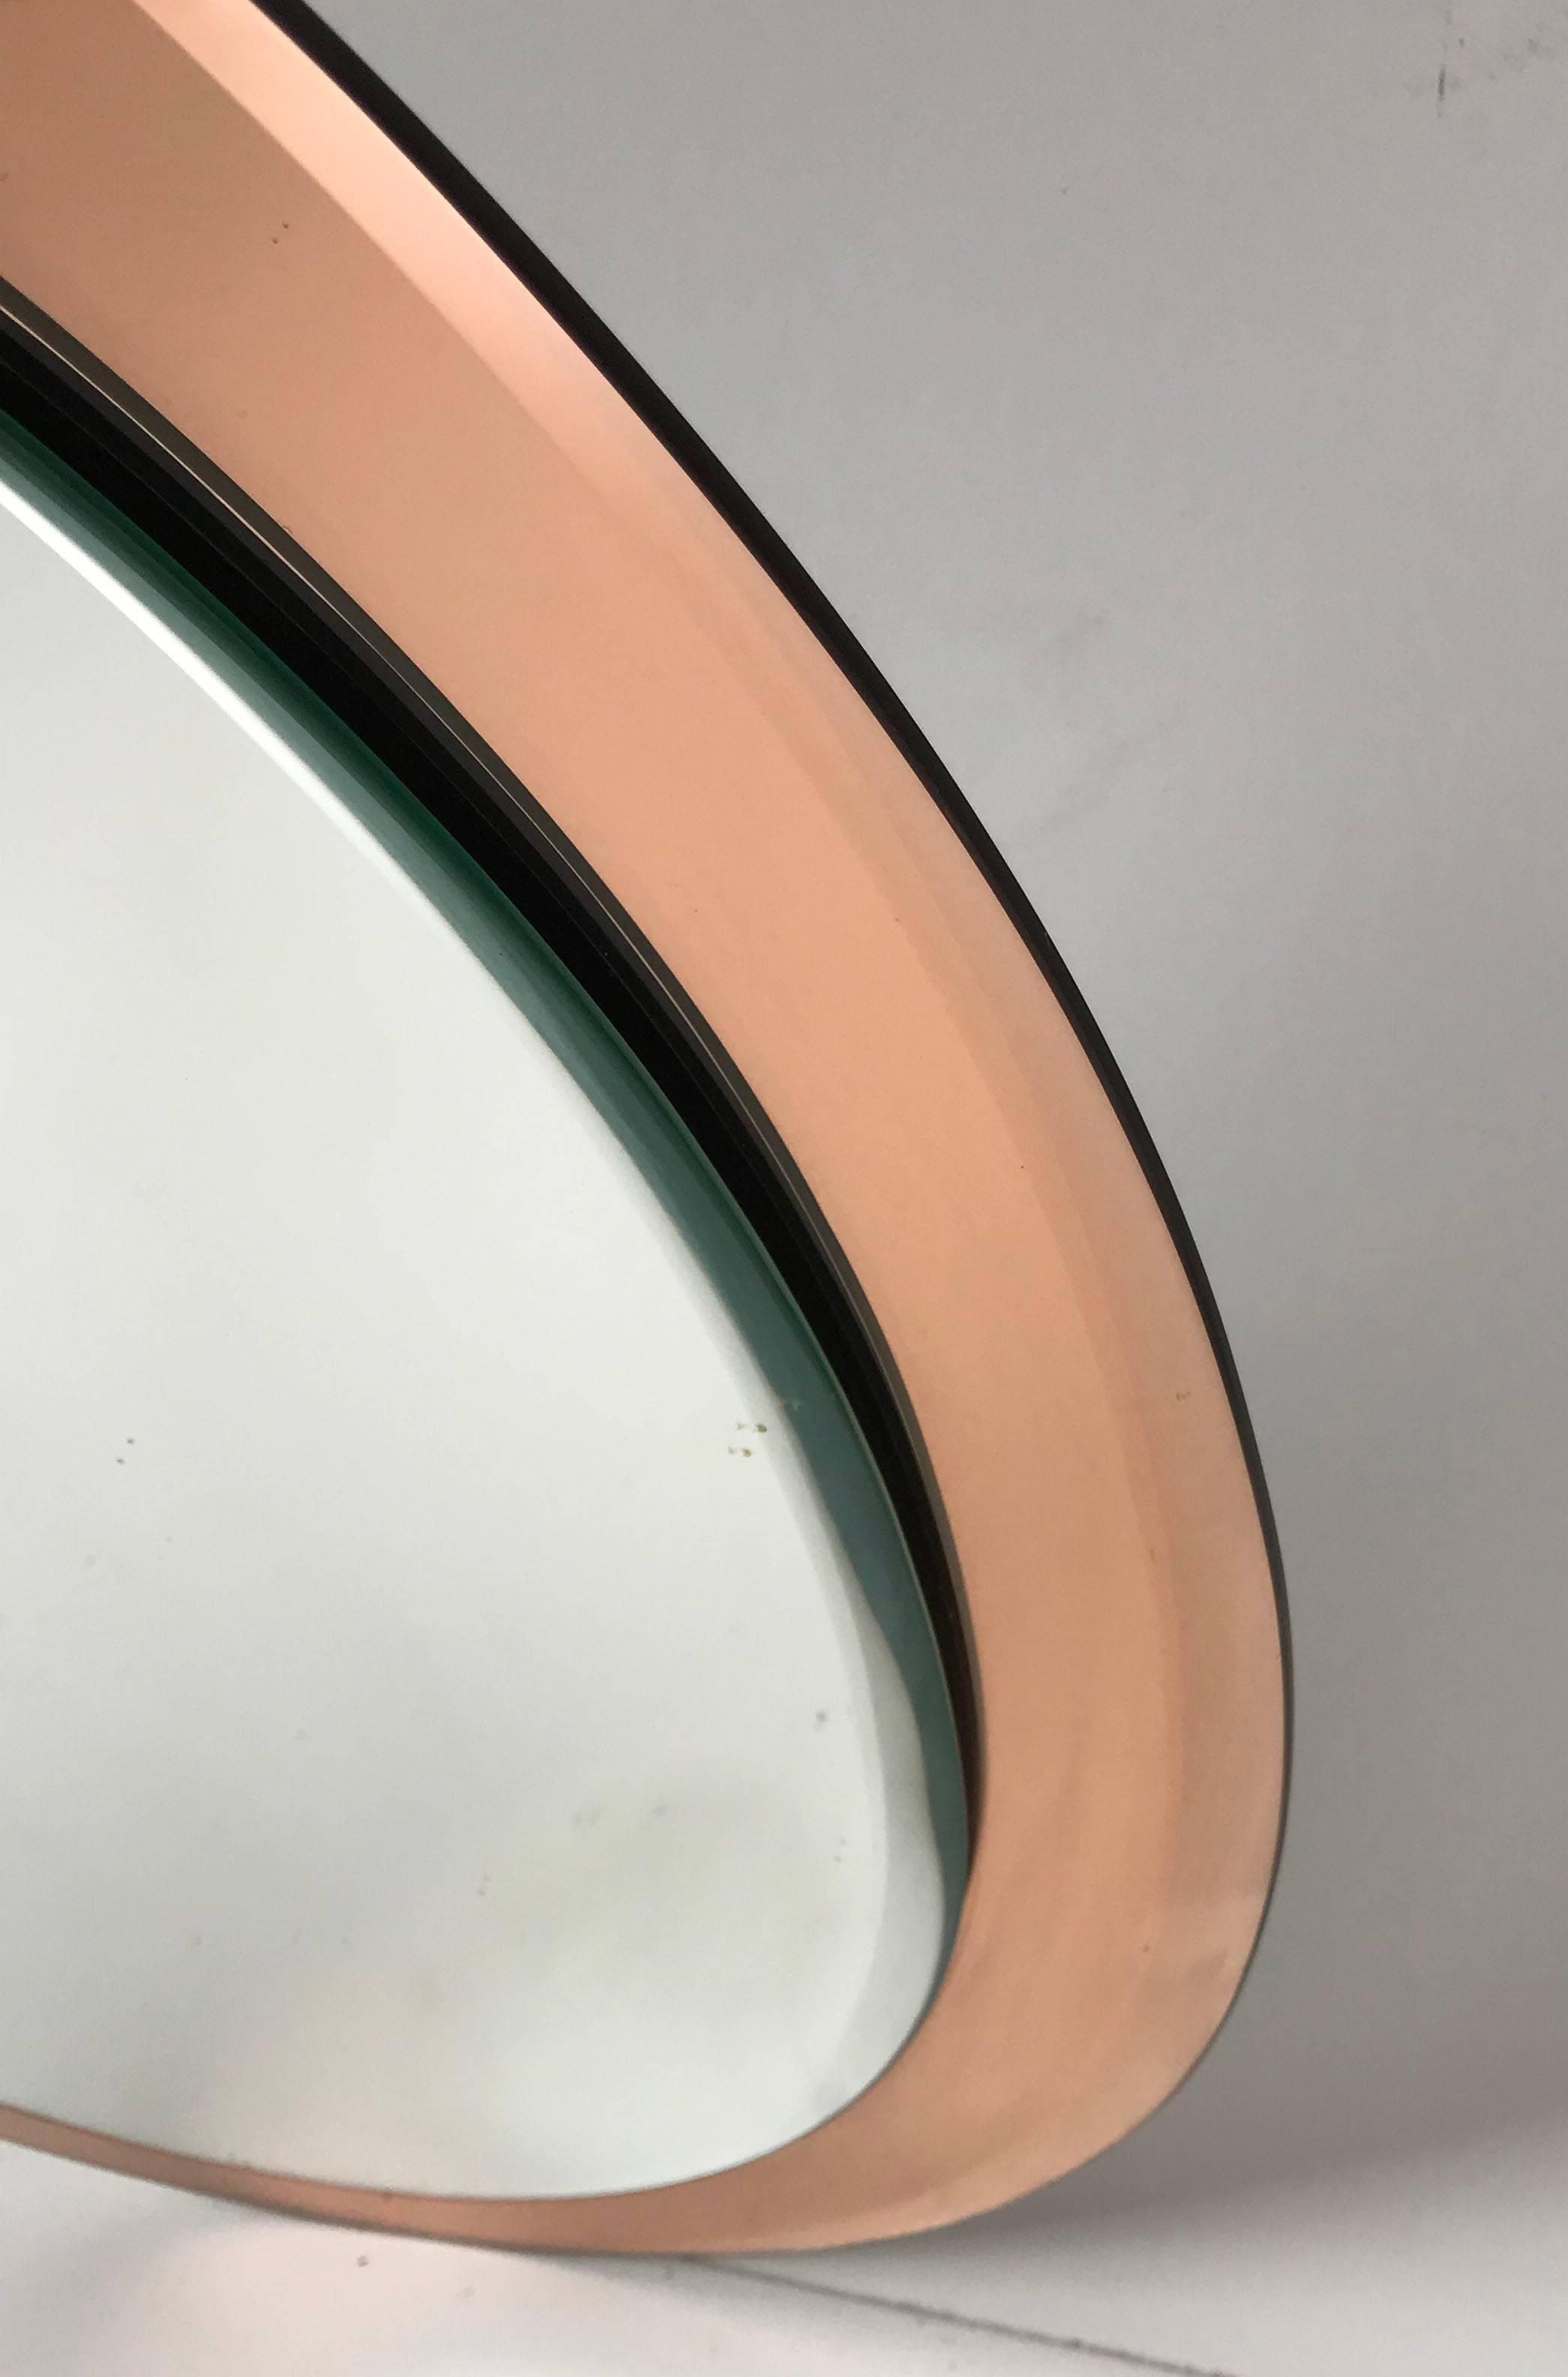 Beveled mirror from Veca, Italy, 1960s
Measure: Old pink frame with central bronze mirror 27